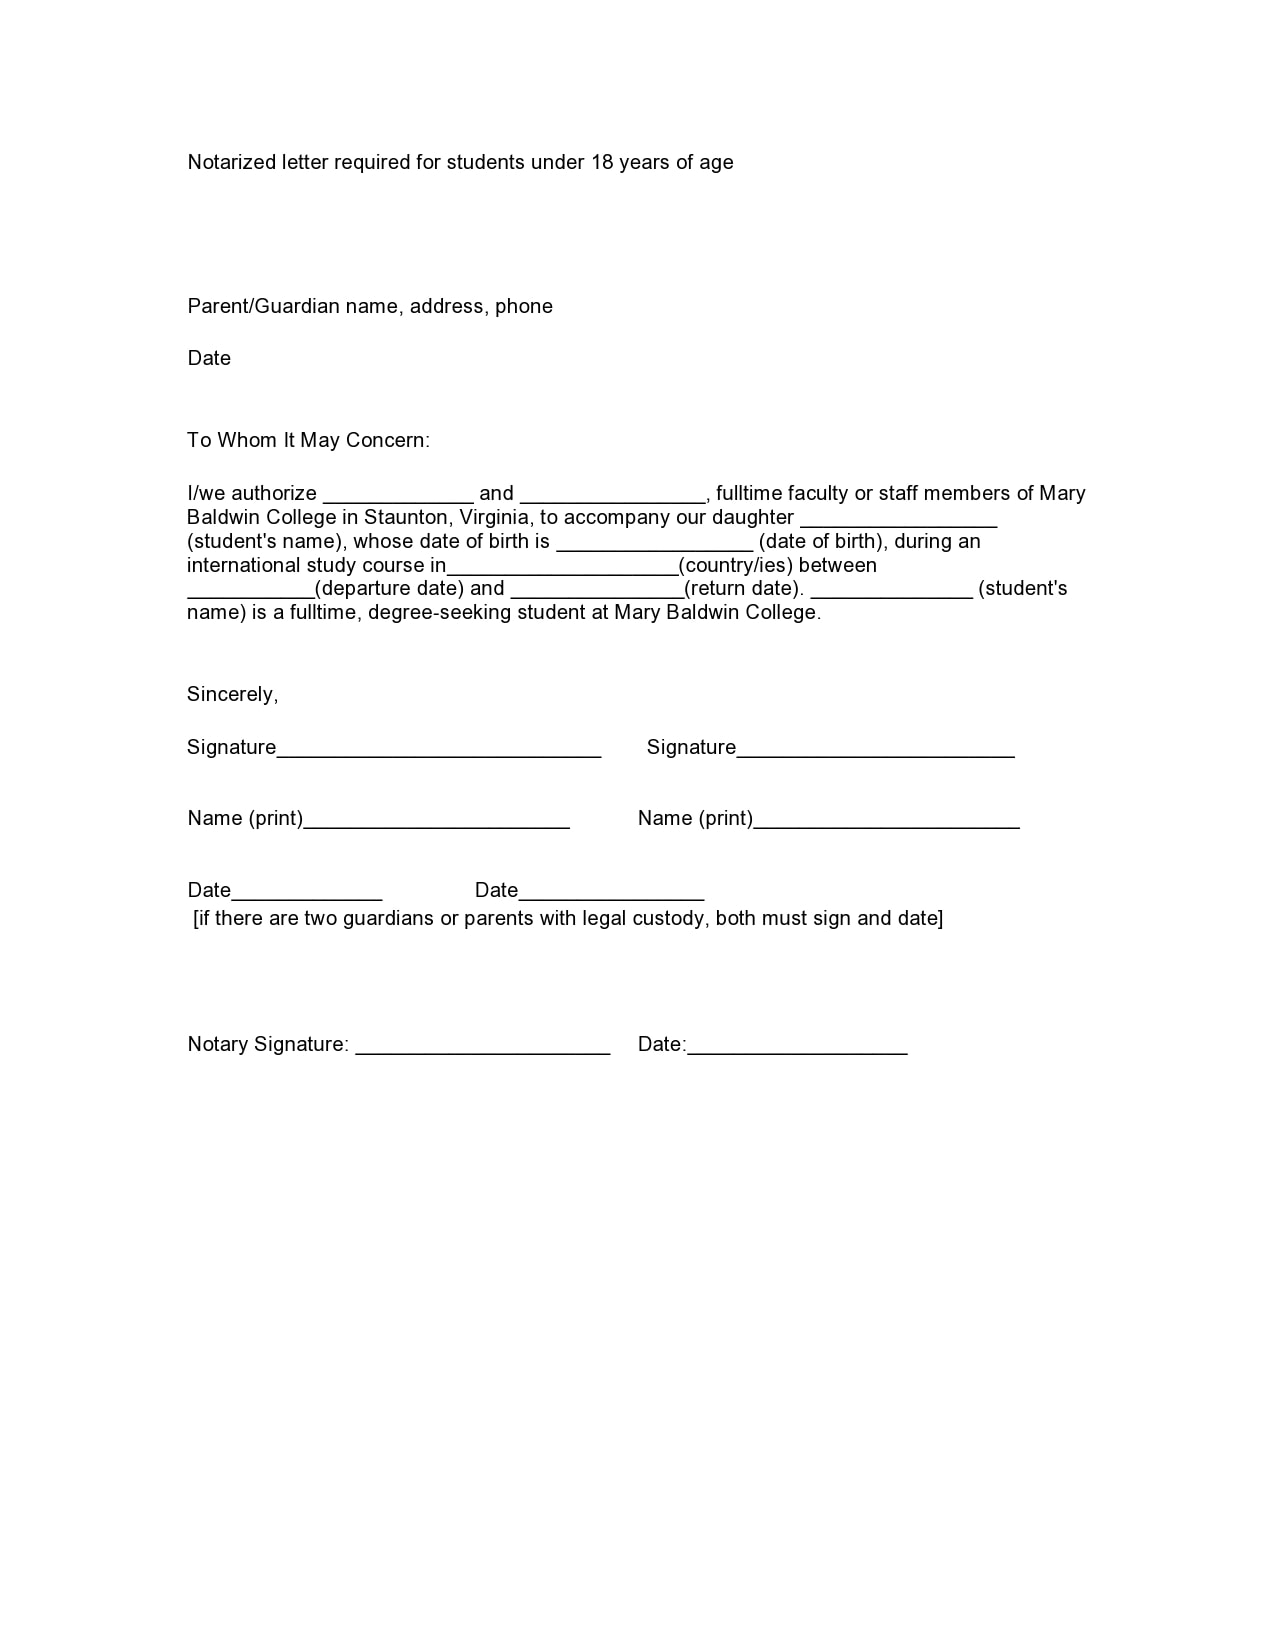 21 Free Notarized Letter Templates Notary Letters - TemplateArchive For notarized custody agreement template